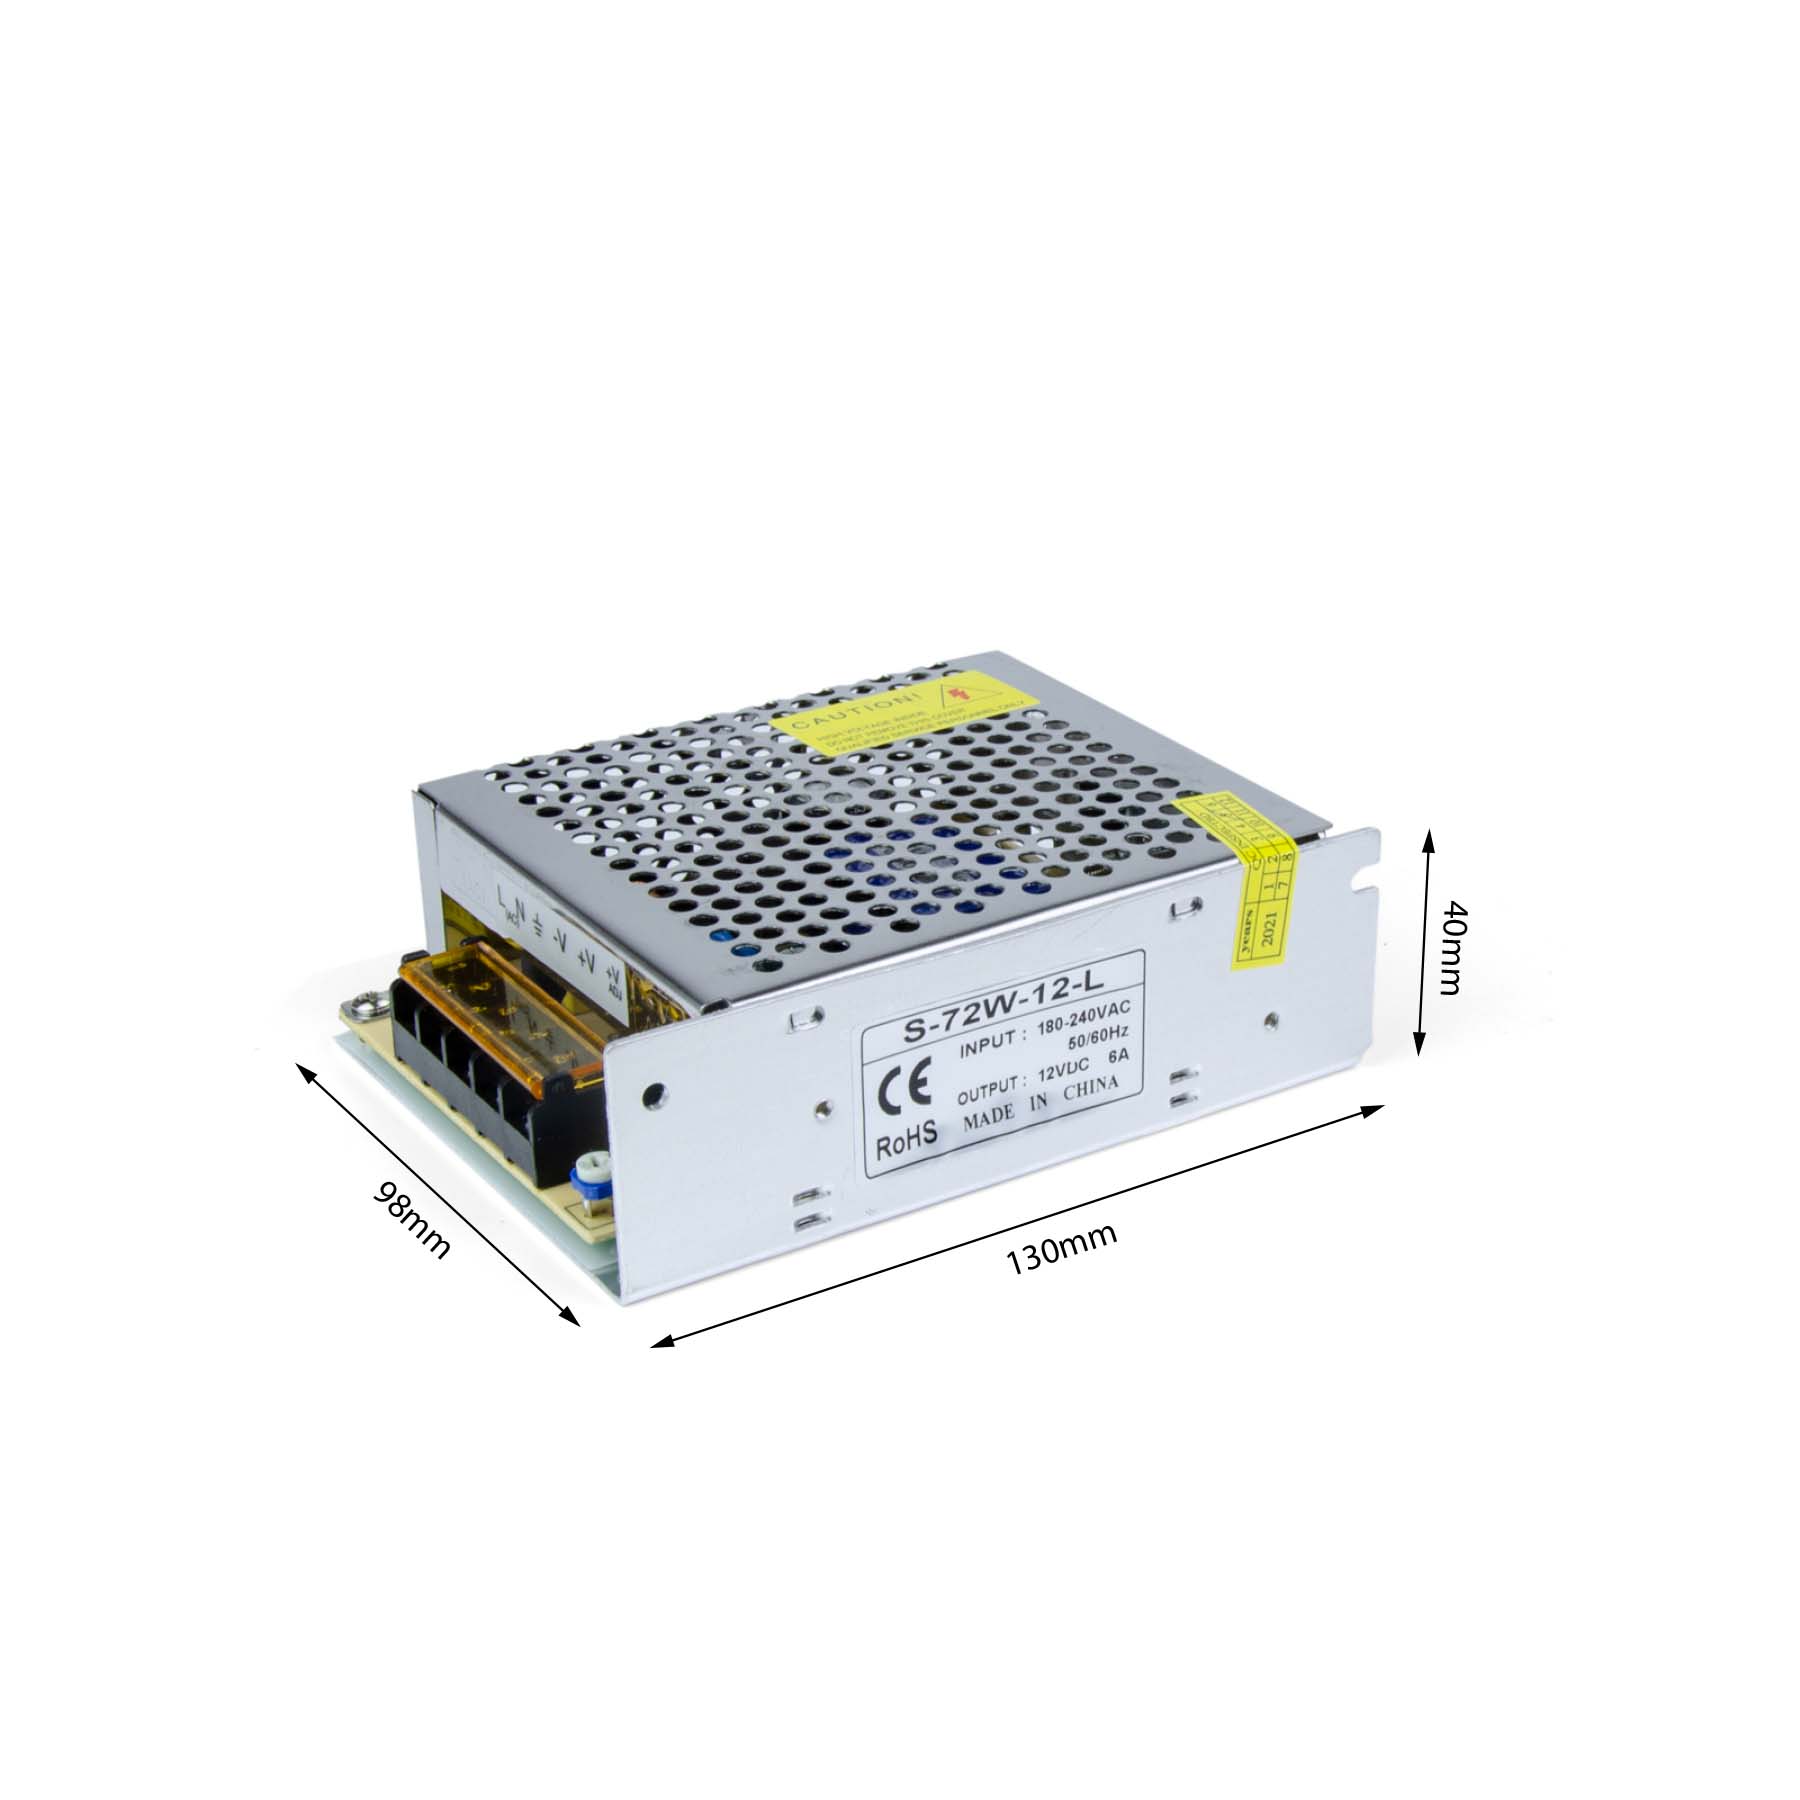 G.W.S. LED LED Drivers/LED Power Supplies IP20 (Non-Waterproof) / 12V / 72W 12V 6A 72W LED Driver